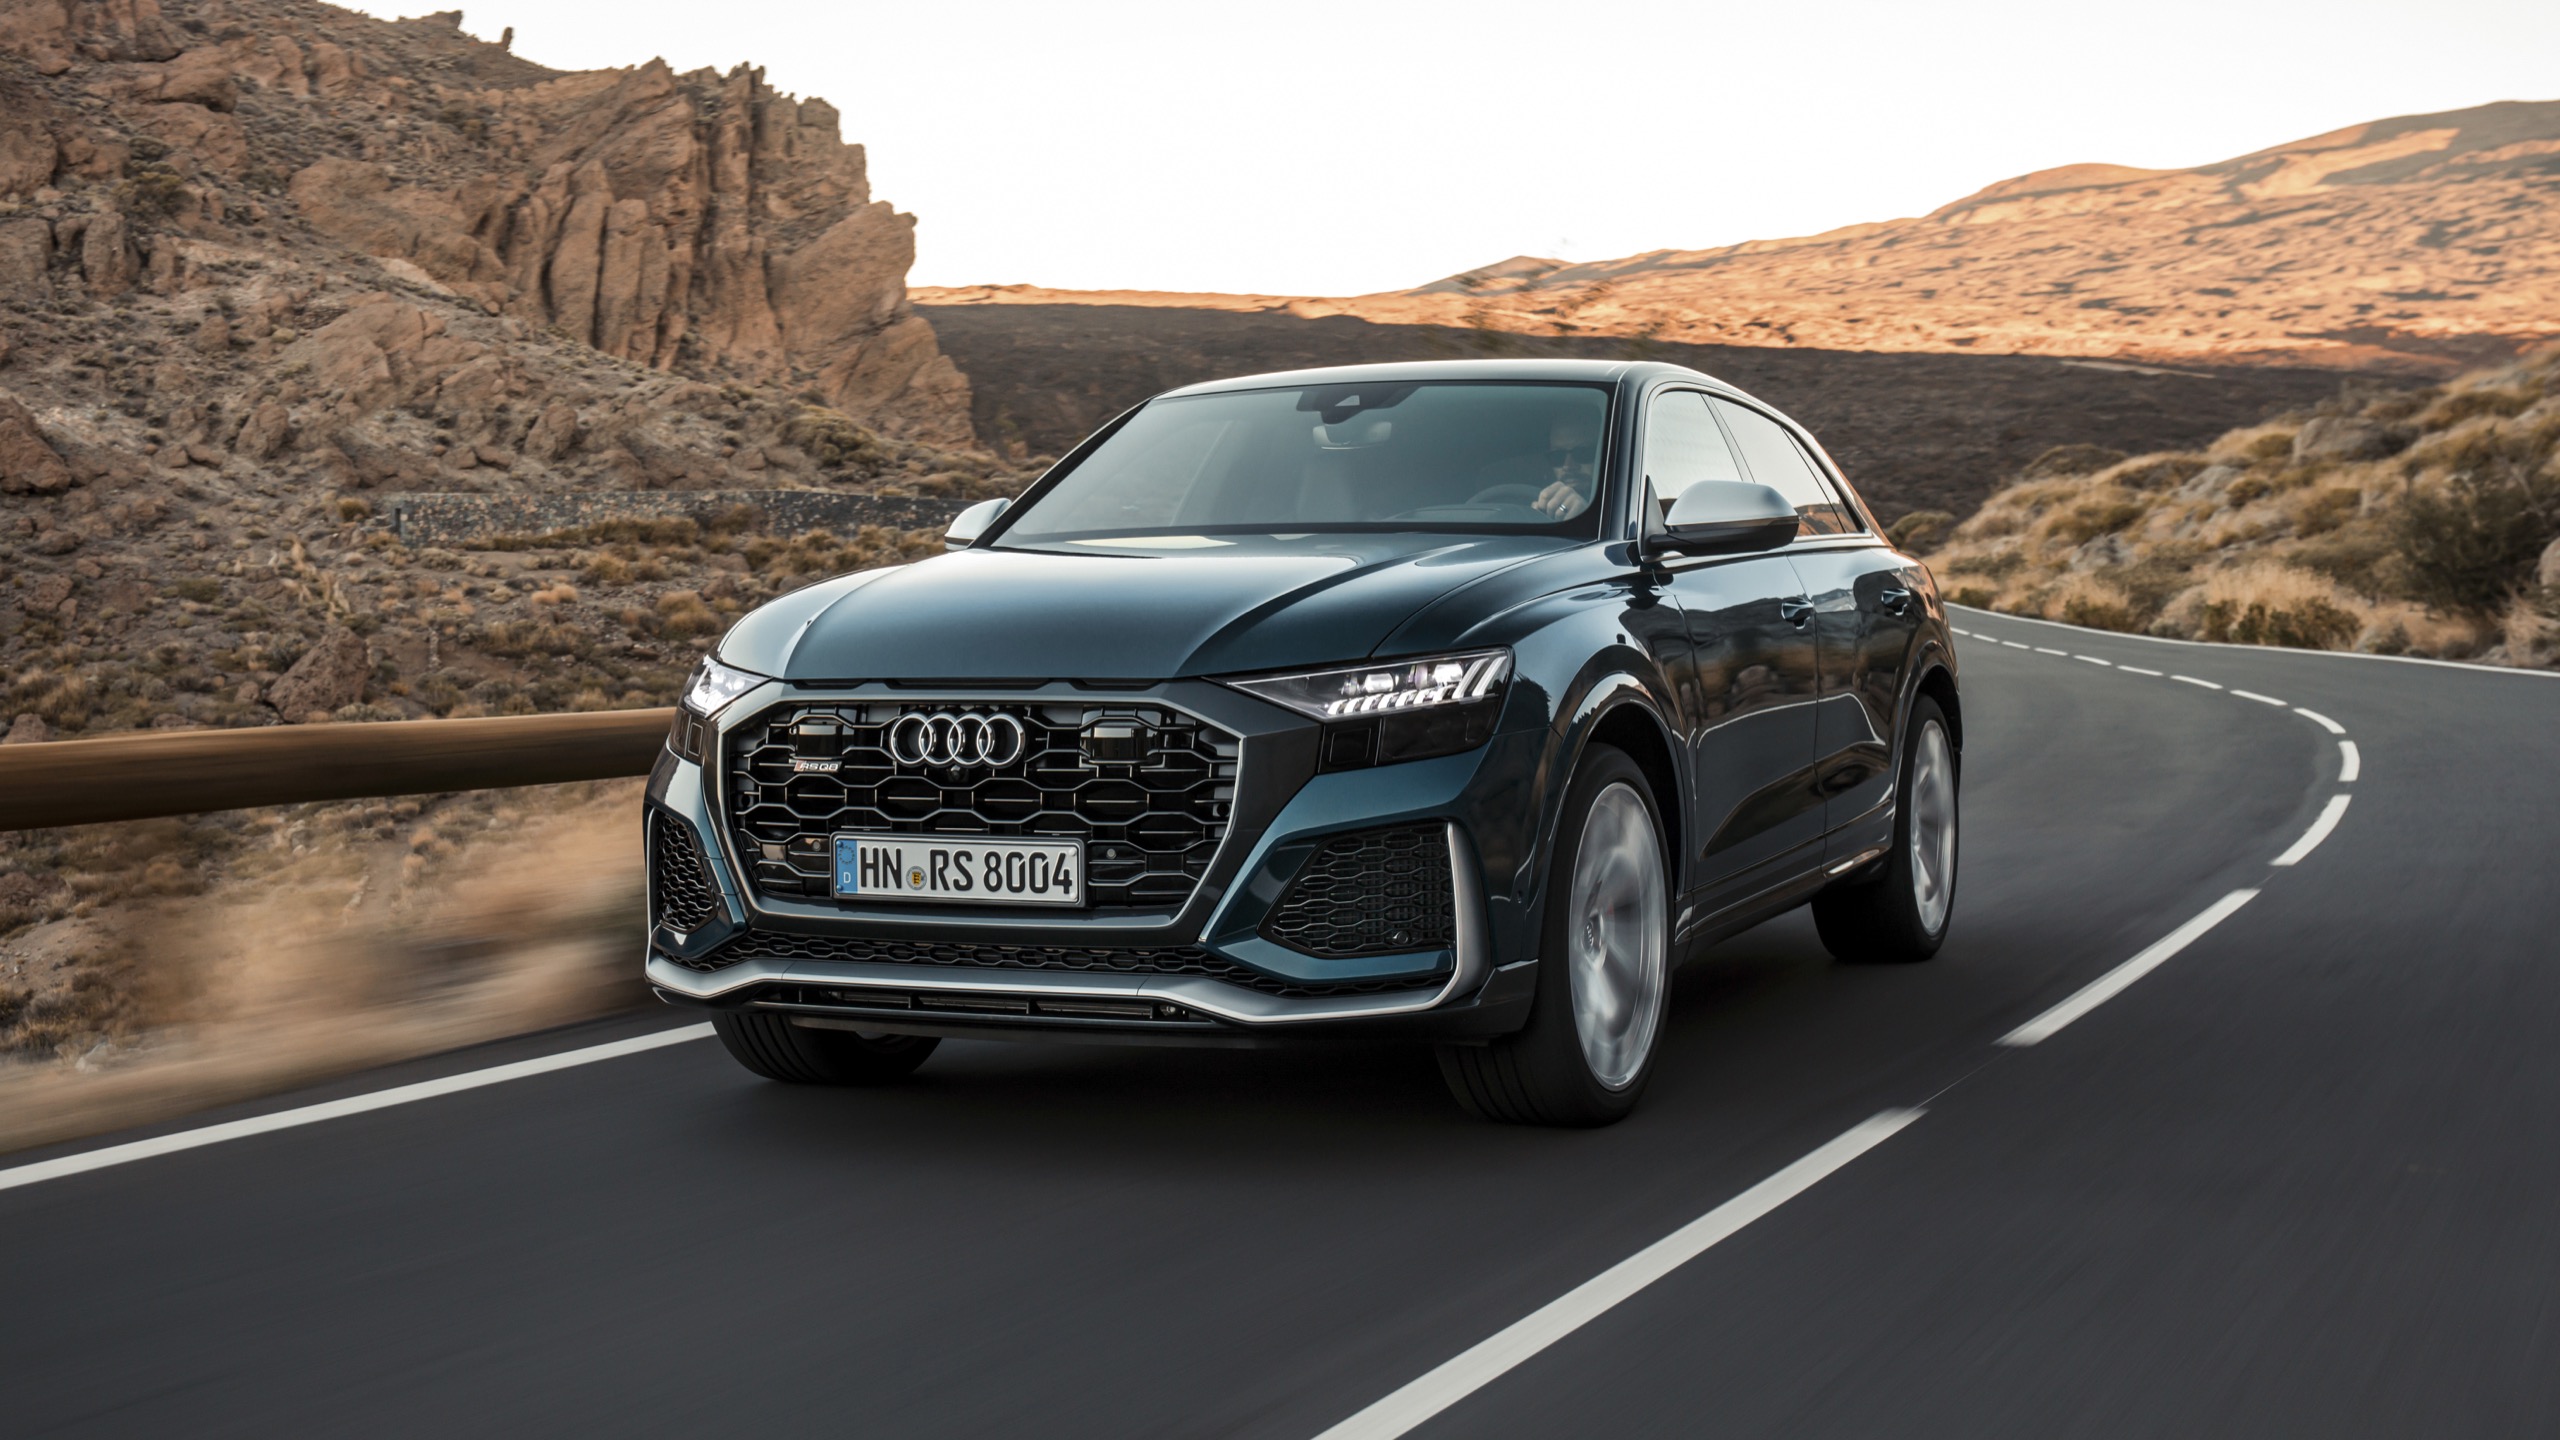 Audi RS Q8 is all set to launch in India this month